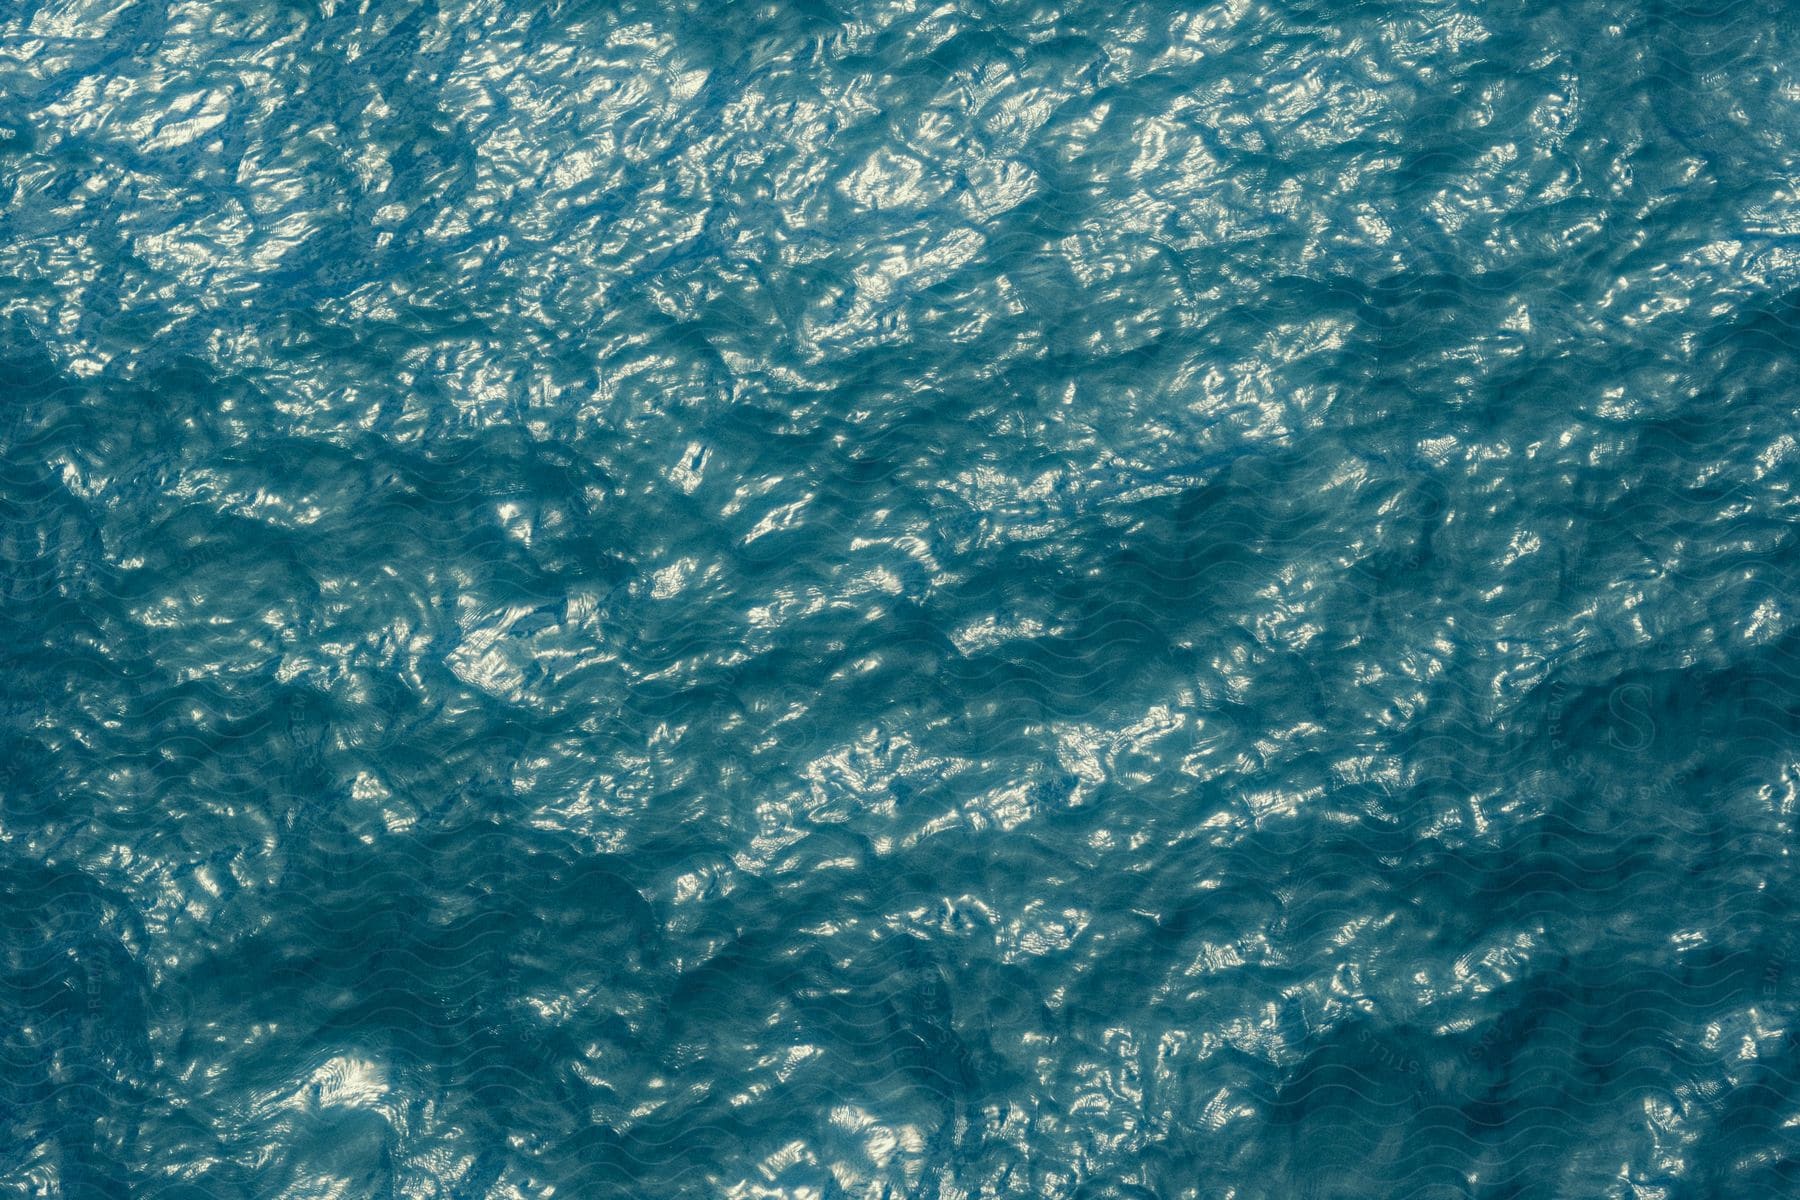 A water surface that is reflecting natural light with small ripples